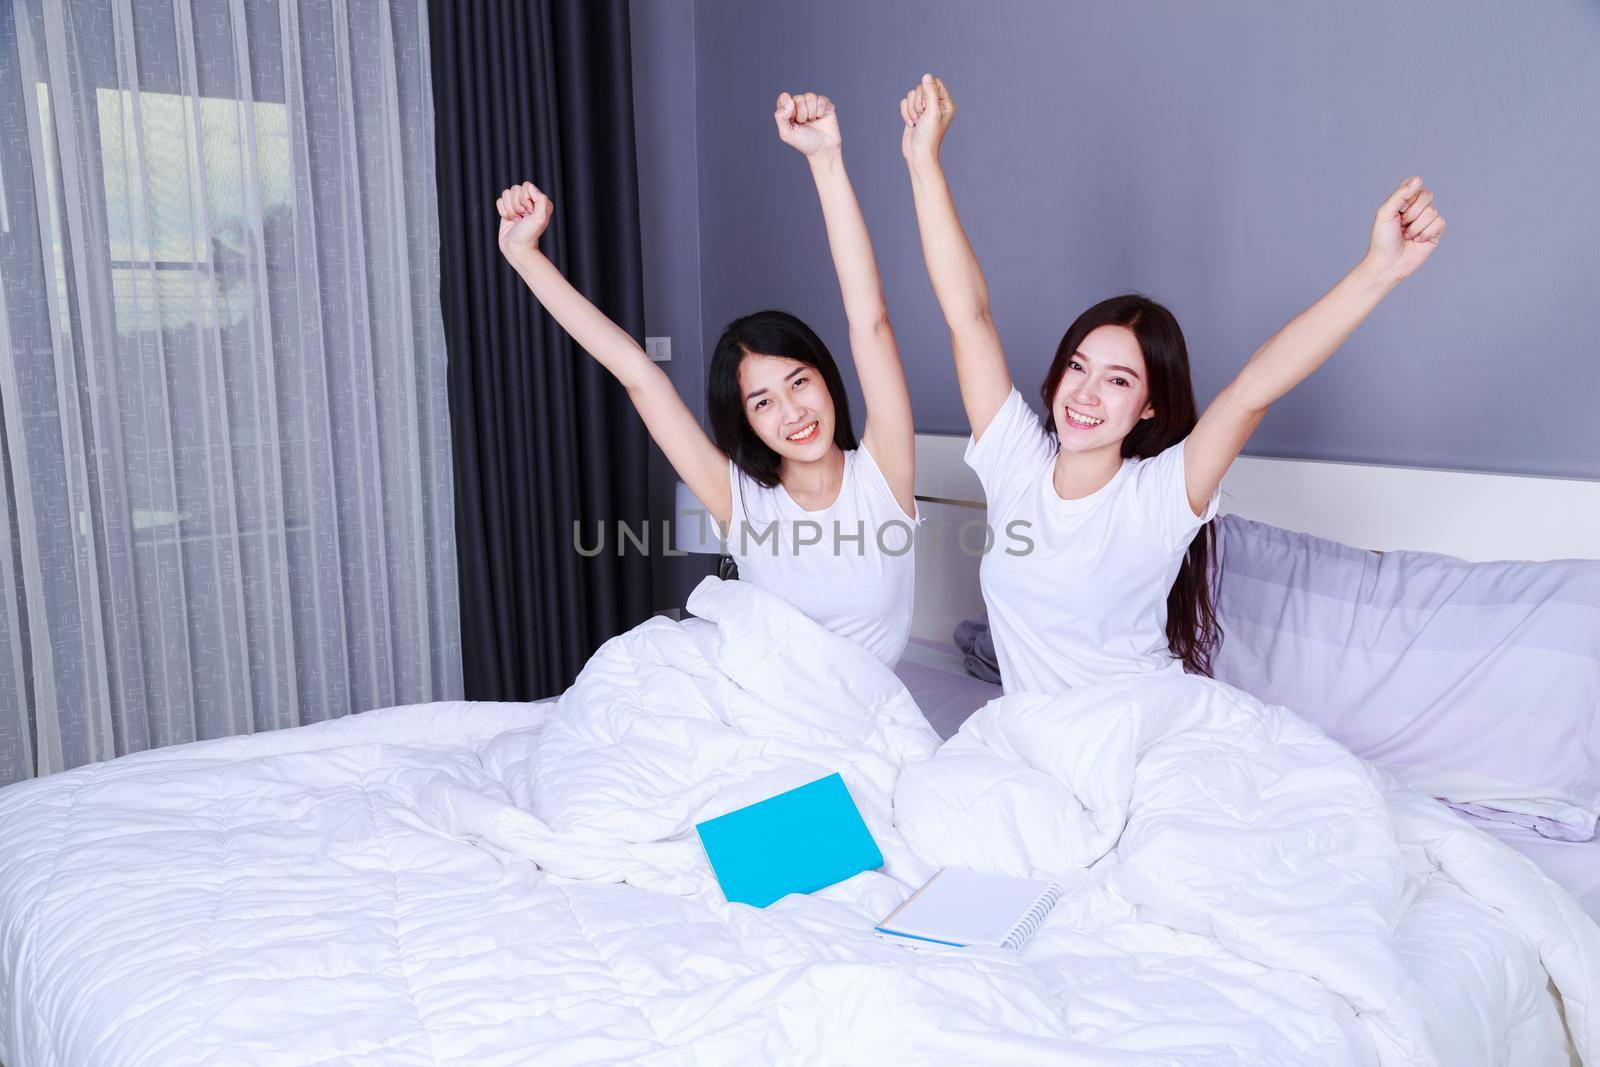 best friend woman with arms raised on bed in bedroom by geargodz